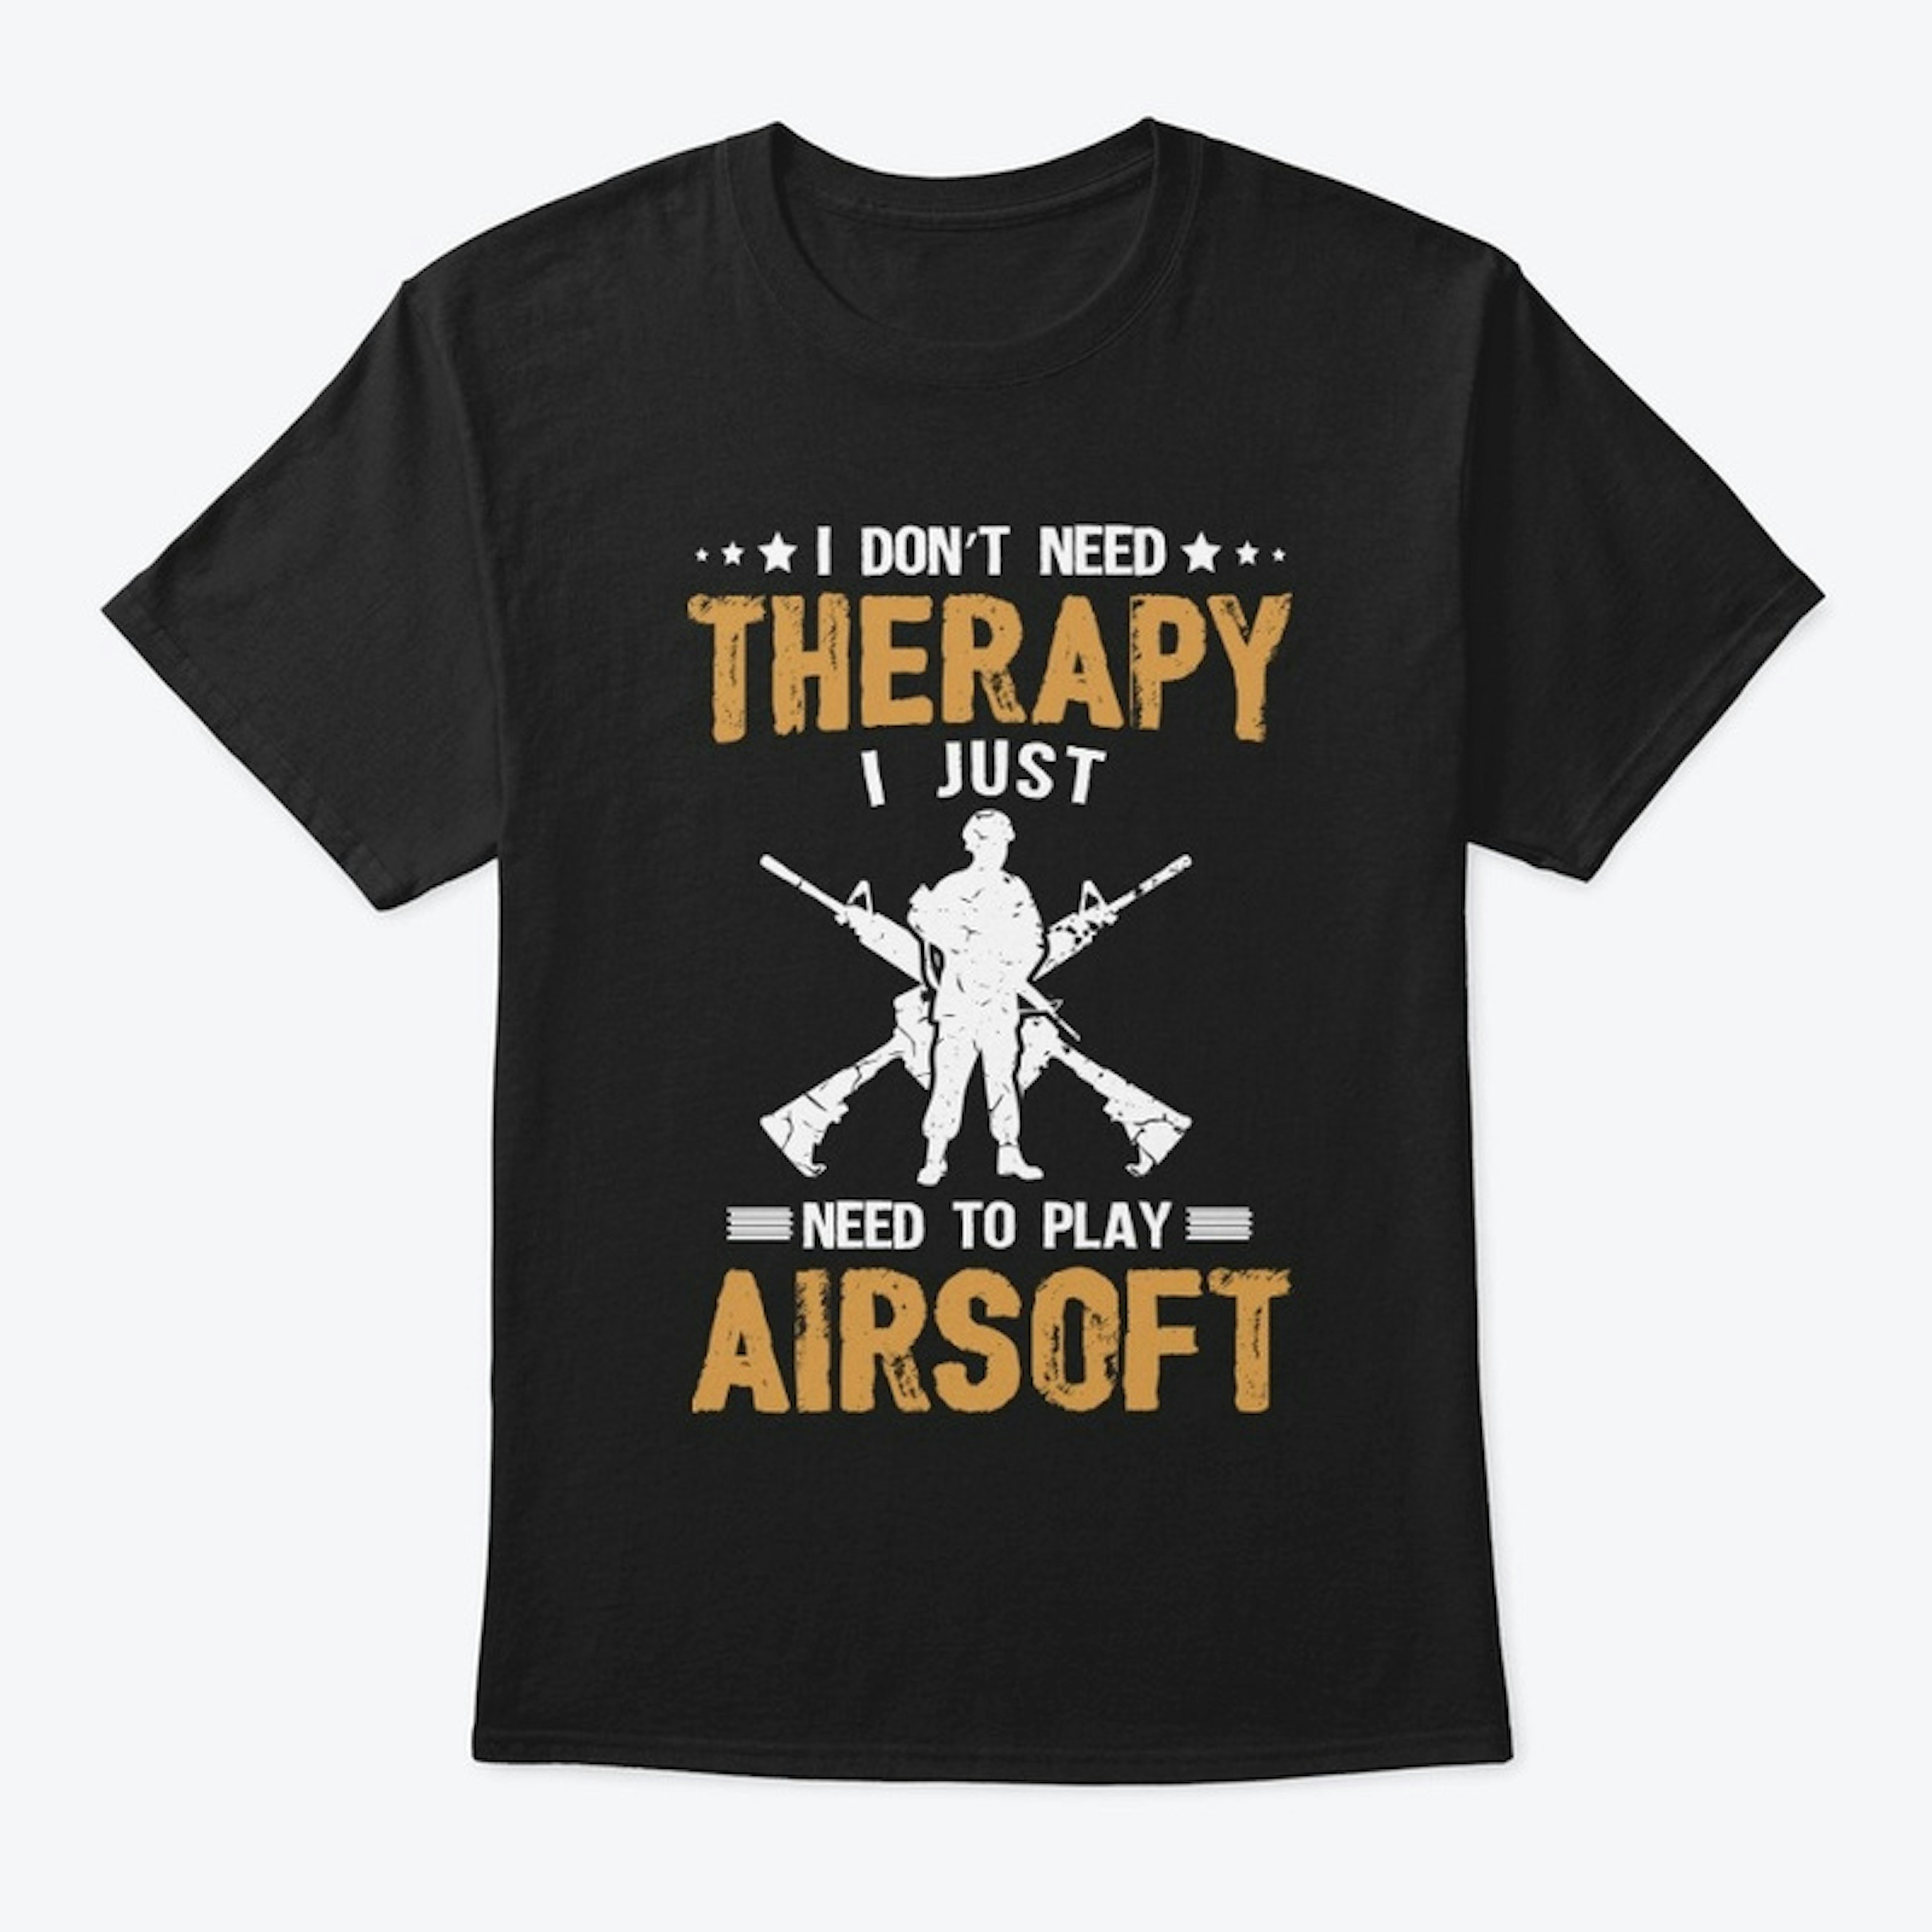 AIRSOFT THERAPY